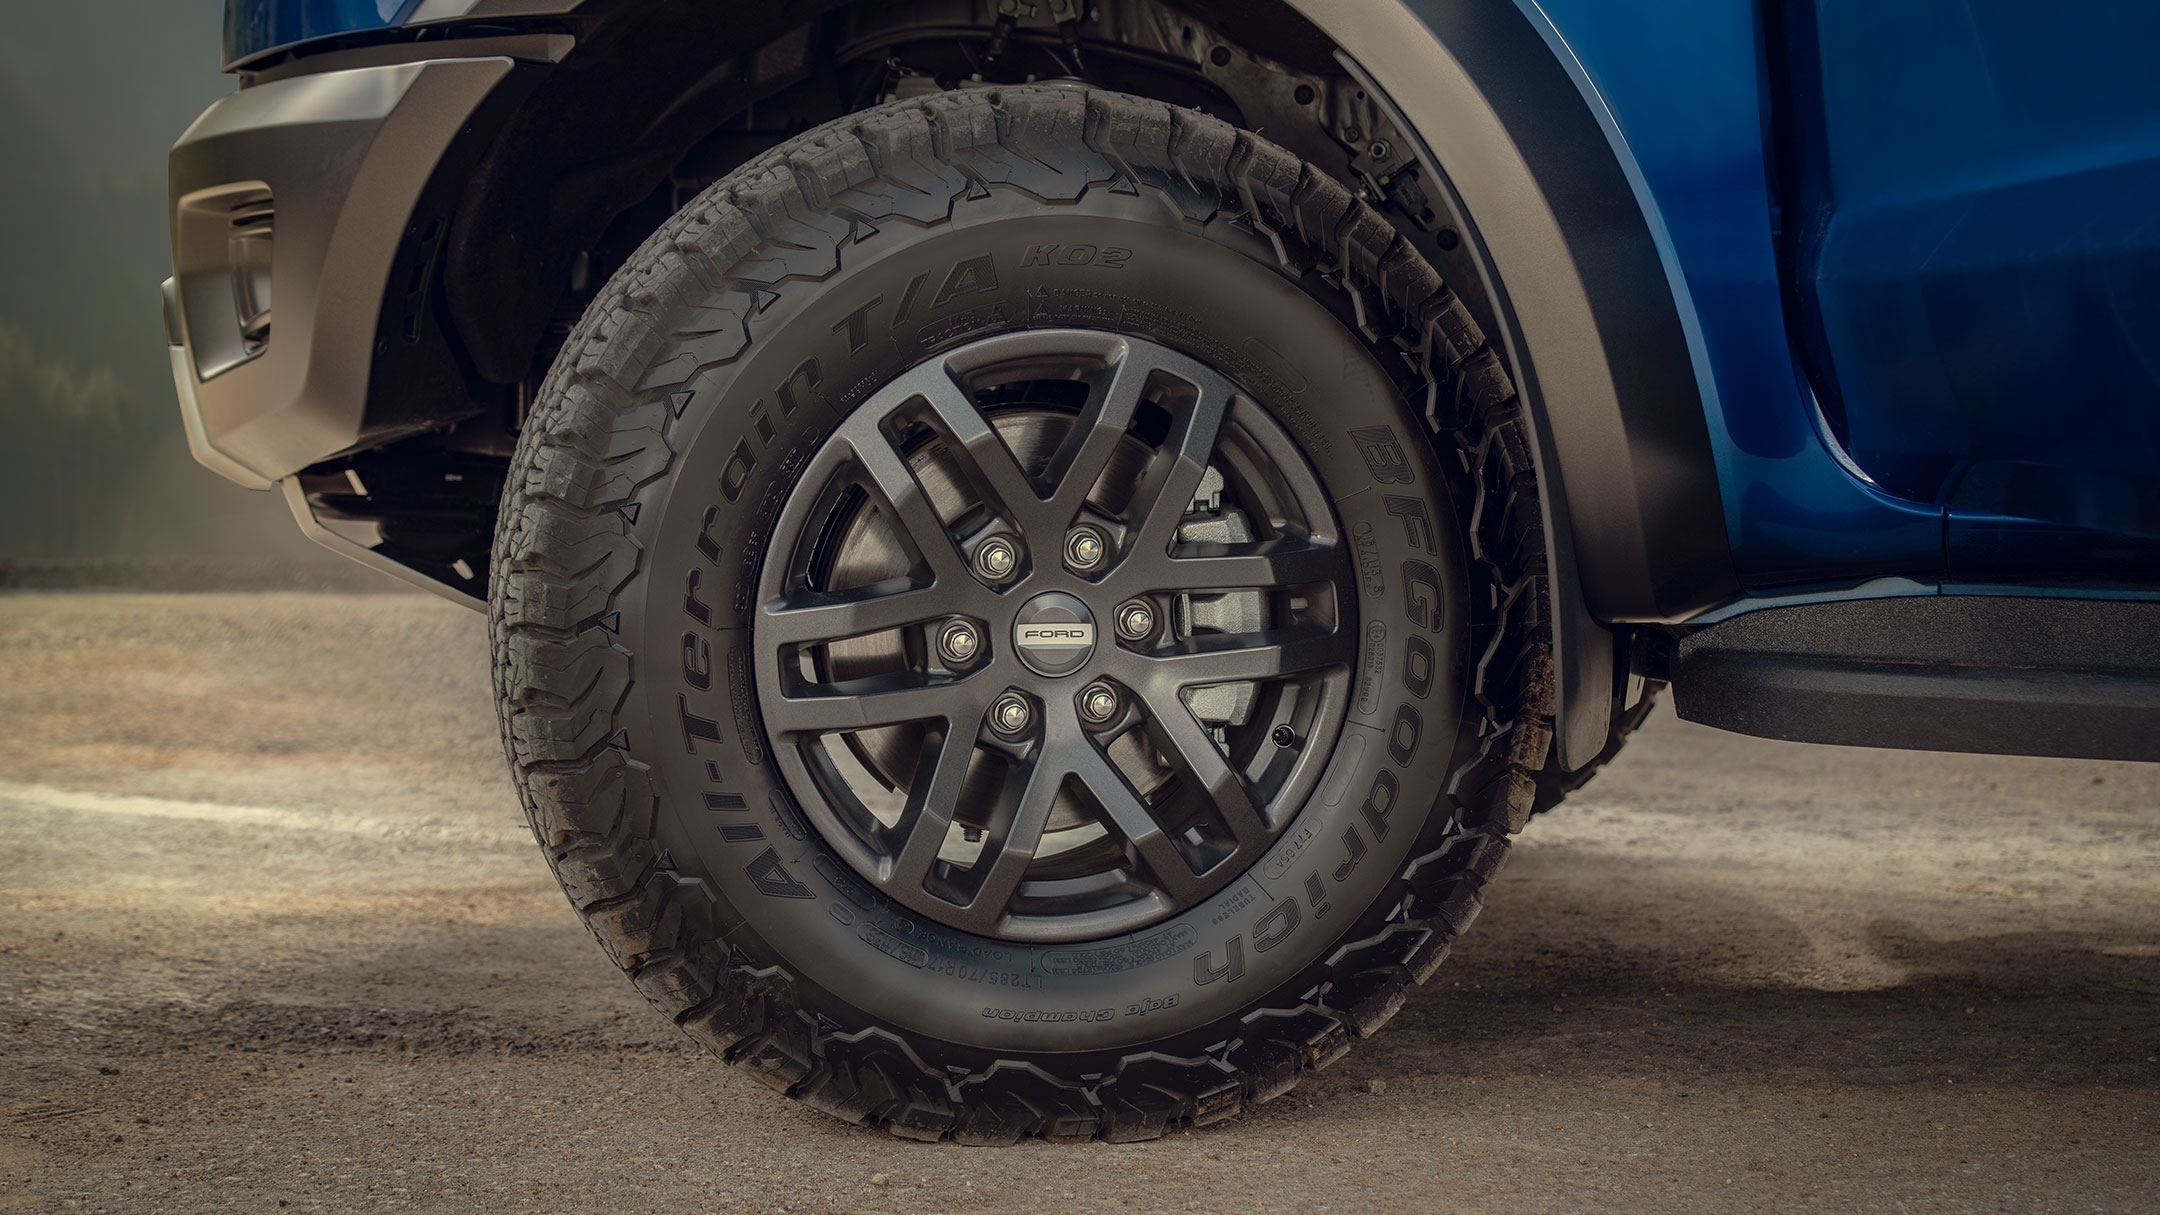 Blue Ford Ranger Raptor tyres and alloys